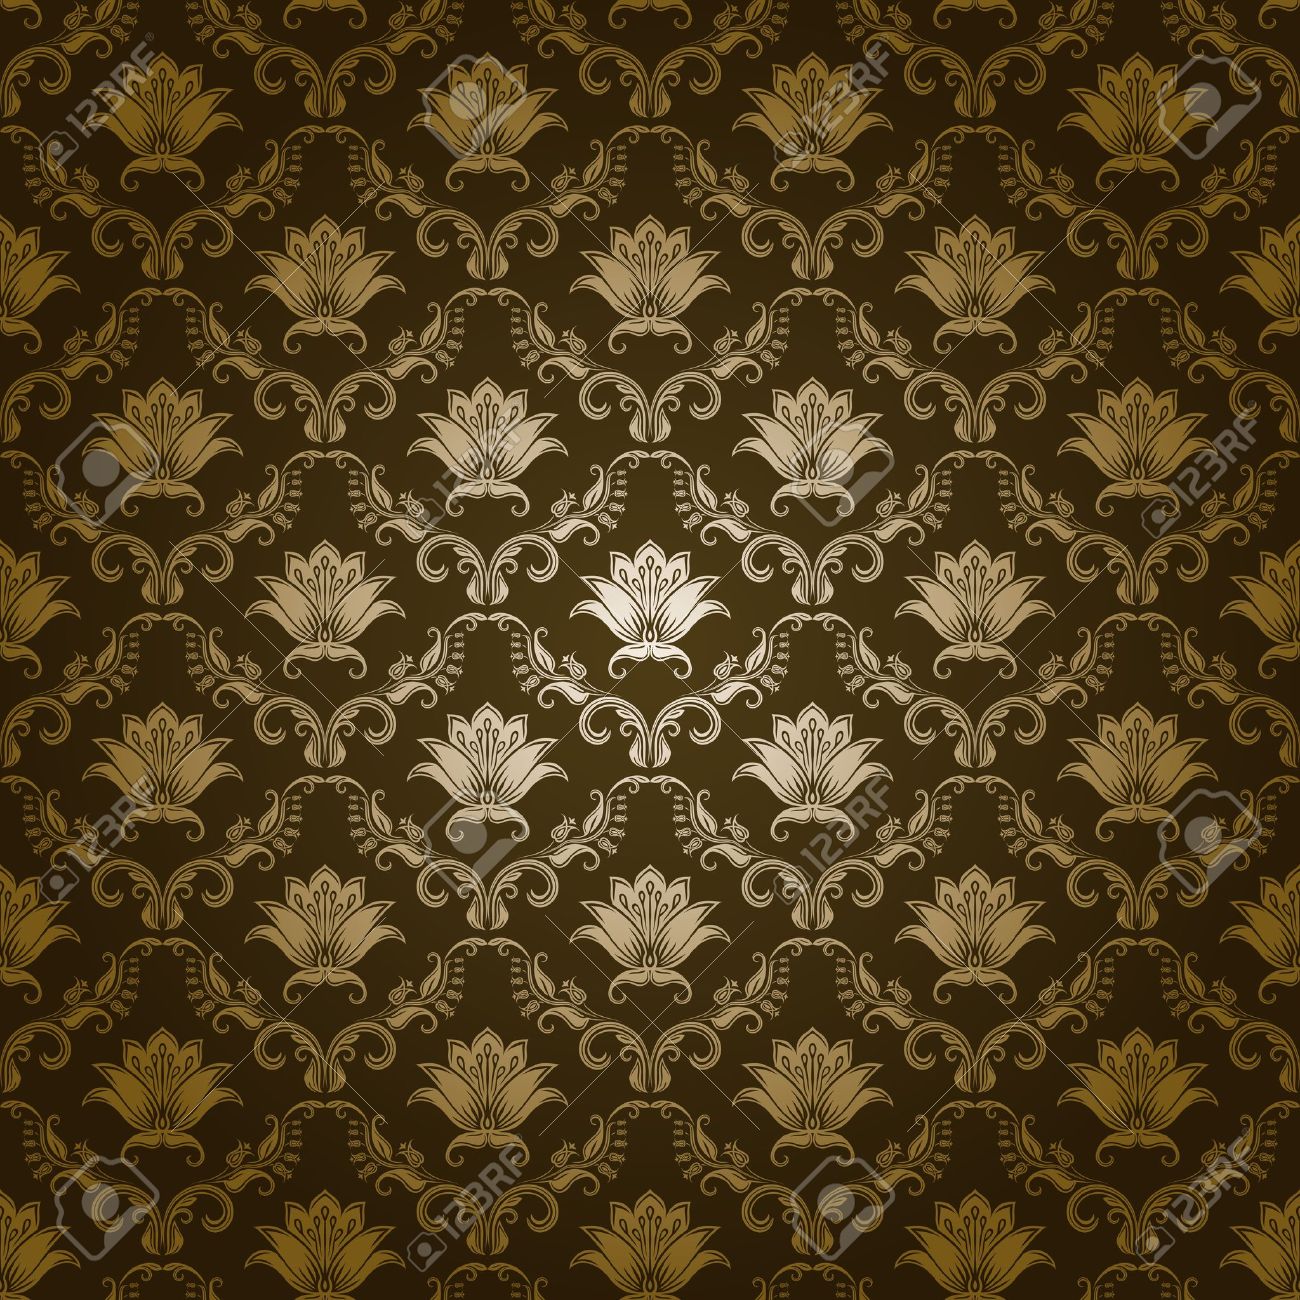 Damask Seamless Floral Pattern Royal Wallpaper Flowers On A